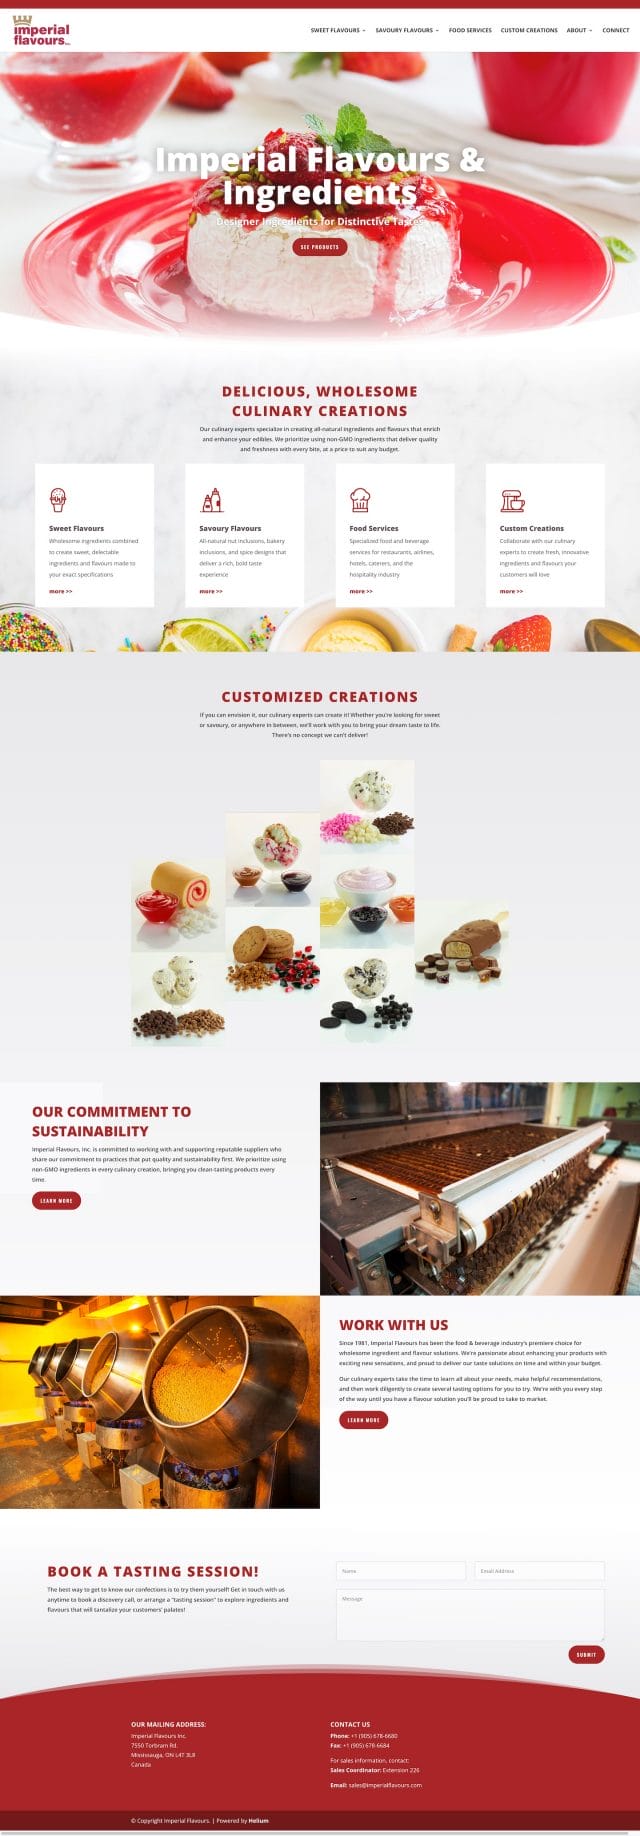 Screenshot of the Imperial Flavours website's homepage